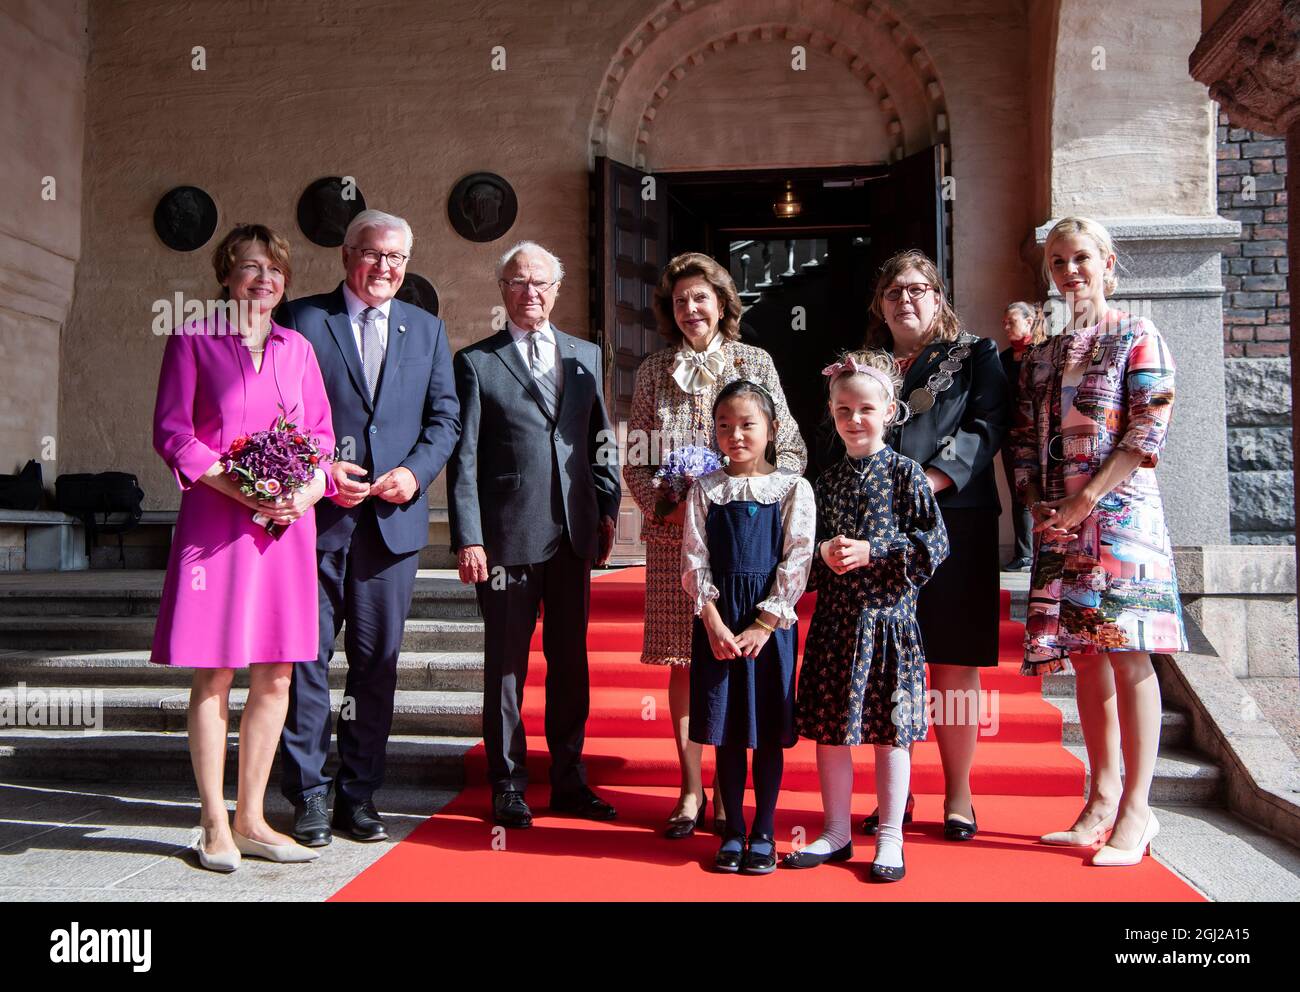 08 September 2021, Sweden, Södertälje: Federal President Frank-Walter Steinmeier (2nd from left) and his wife Elke Büdenbender (l), together with King Carl XVI Gustaf (3rd from left) and Queen Silvia (M) of Sweden, are welcomed by Cecilia Brinck, Chairwoman of Stockholm City Council, and Anna König Jerlmyr (r), Lord Mayor of Stockholm, at the Vault of One Hundred in Stockholm City Hall. President Steinmeier and his wife are in Sweden on a three-day state visit at the invitation of the Swedish royal couple. Photo: Bernd von Jutrczenka/dpa Stock Photo